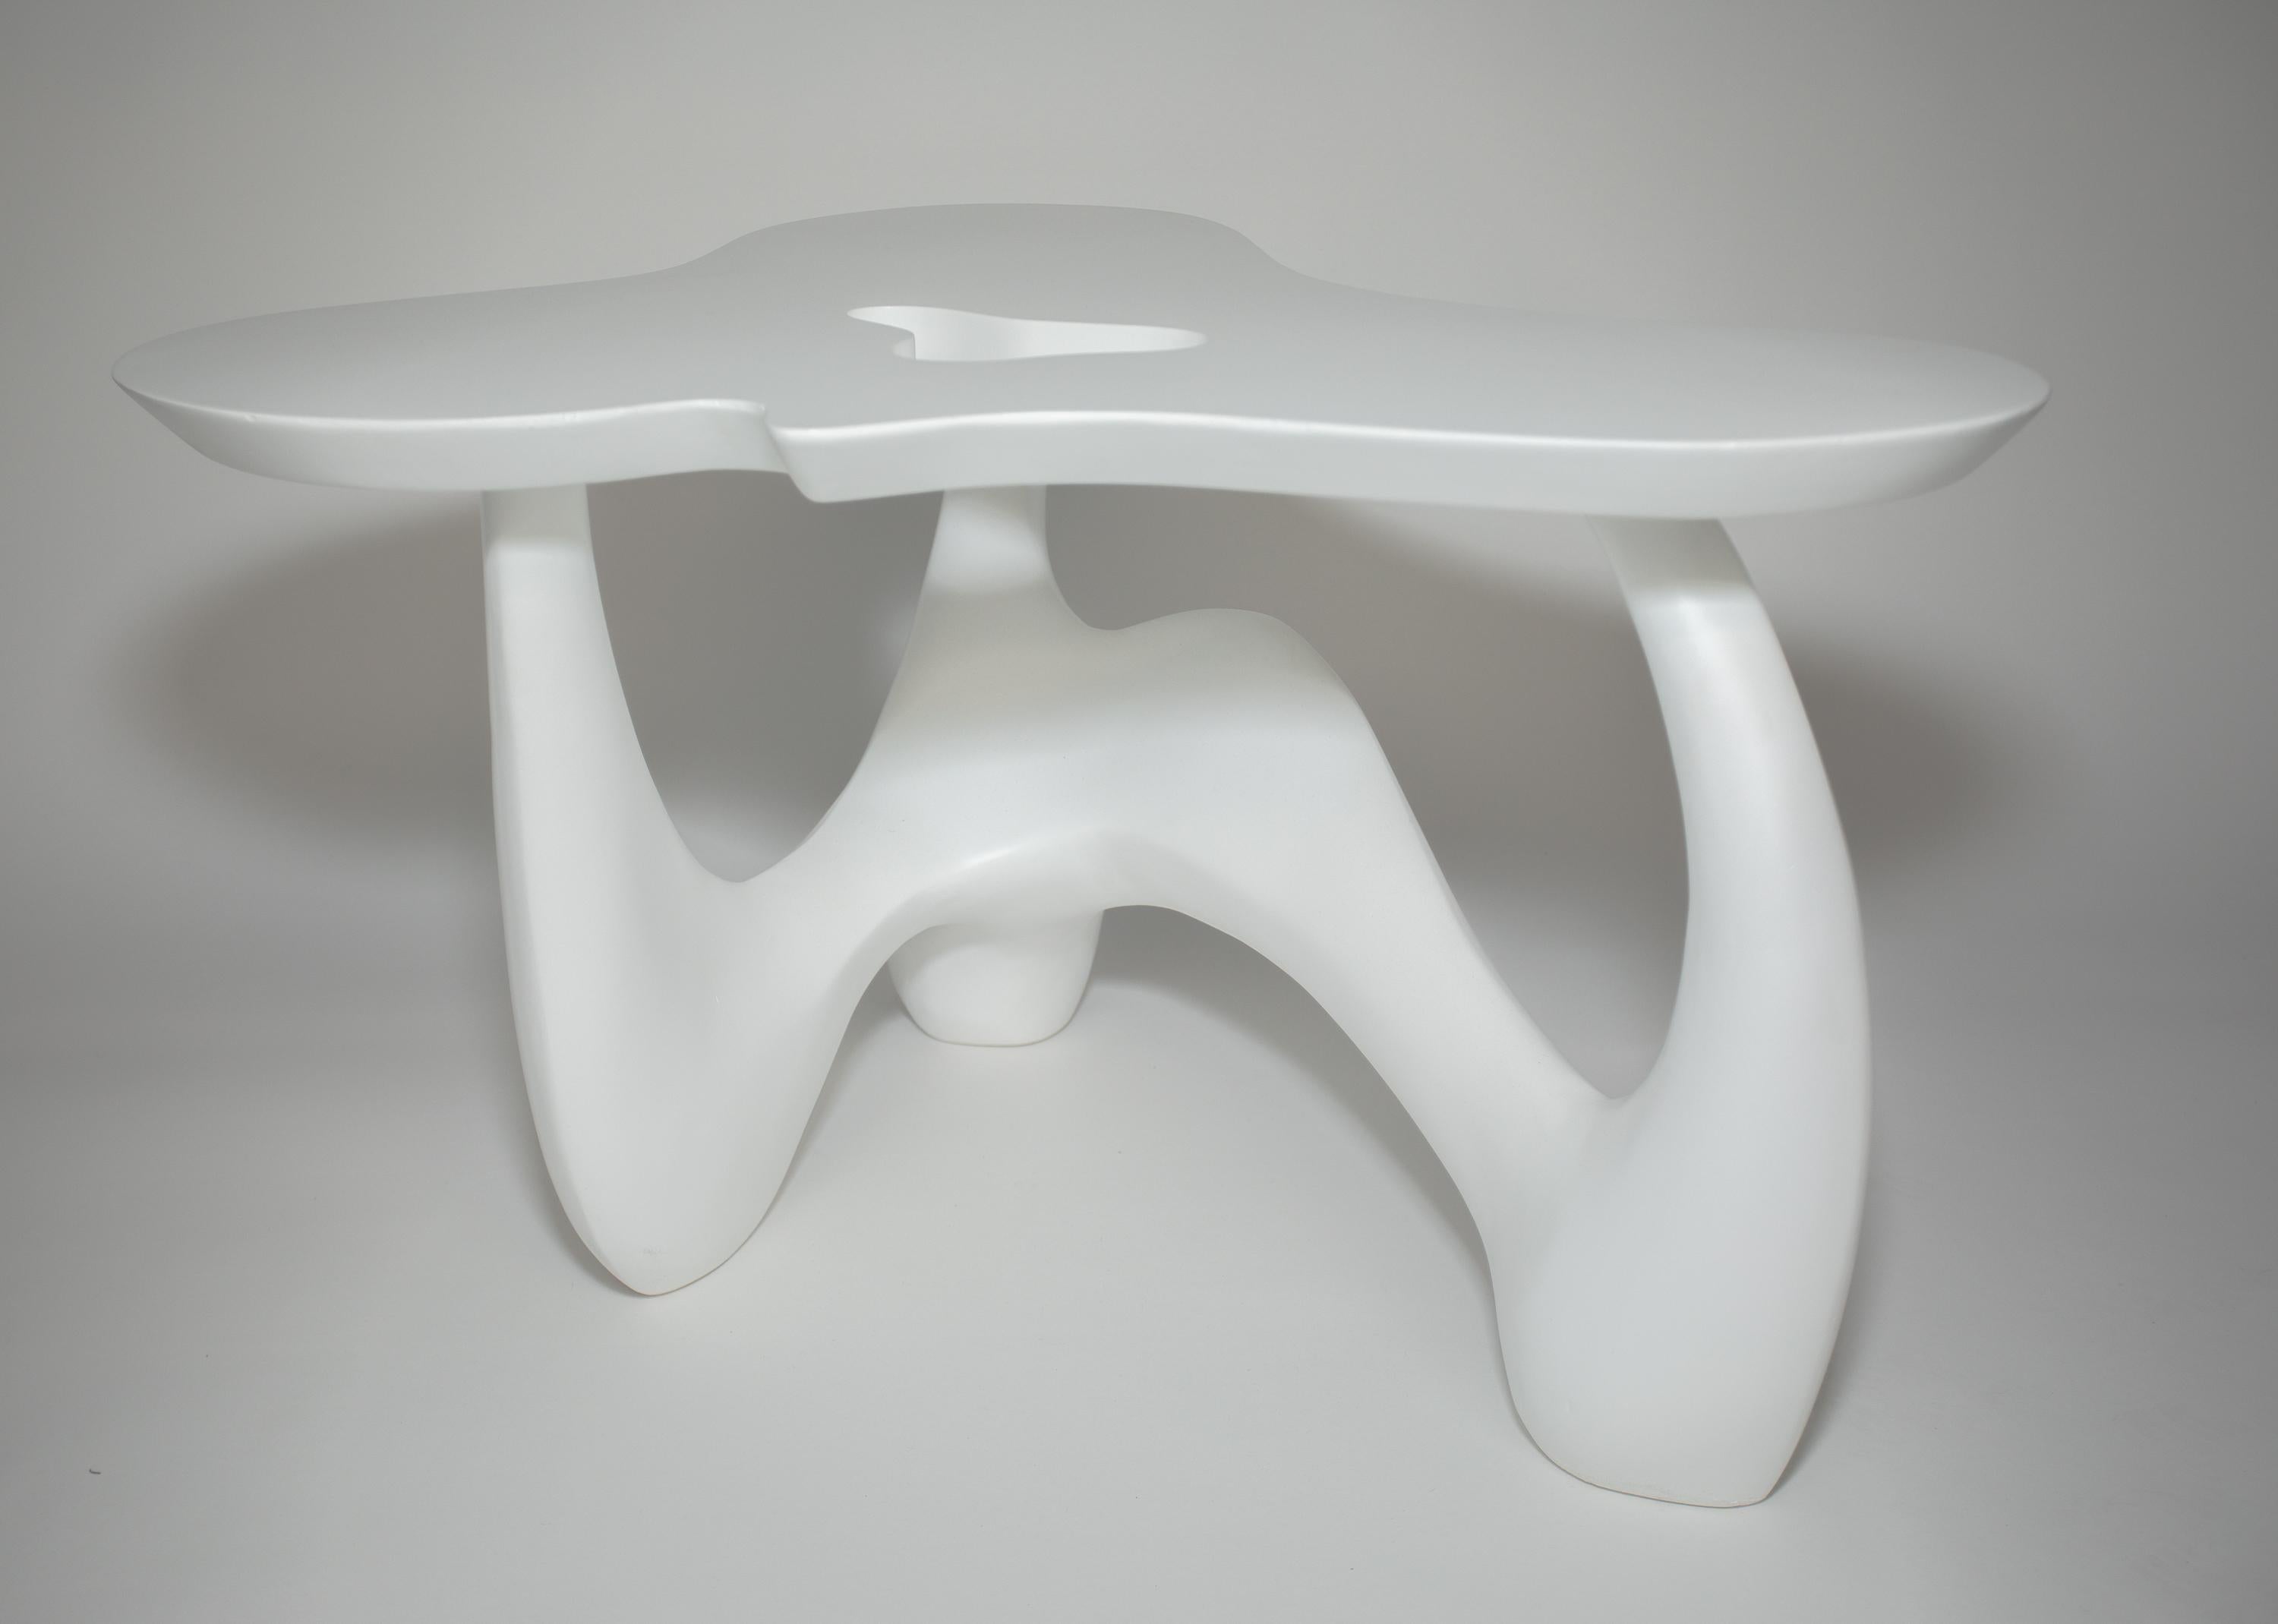 Wood White Lacquered Biomorphic Table For Sale